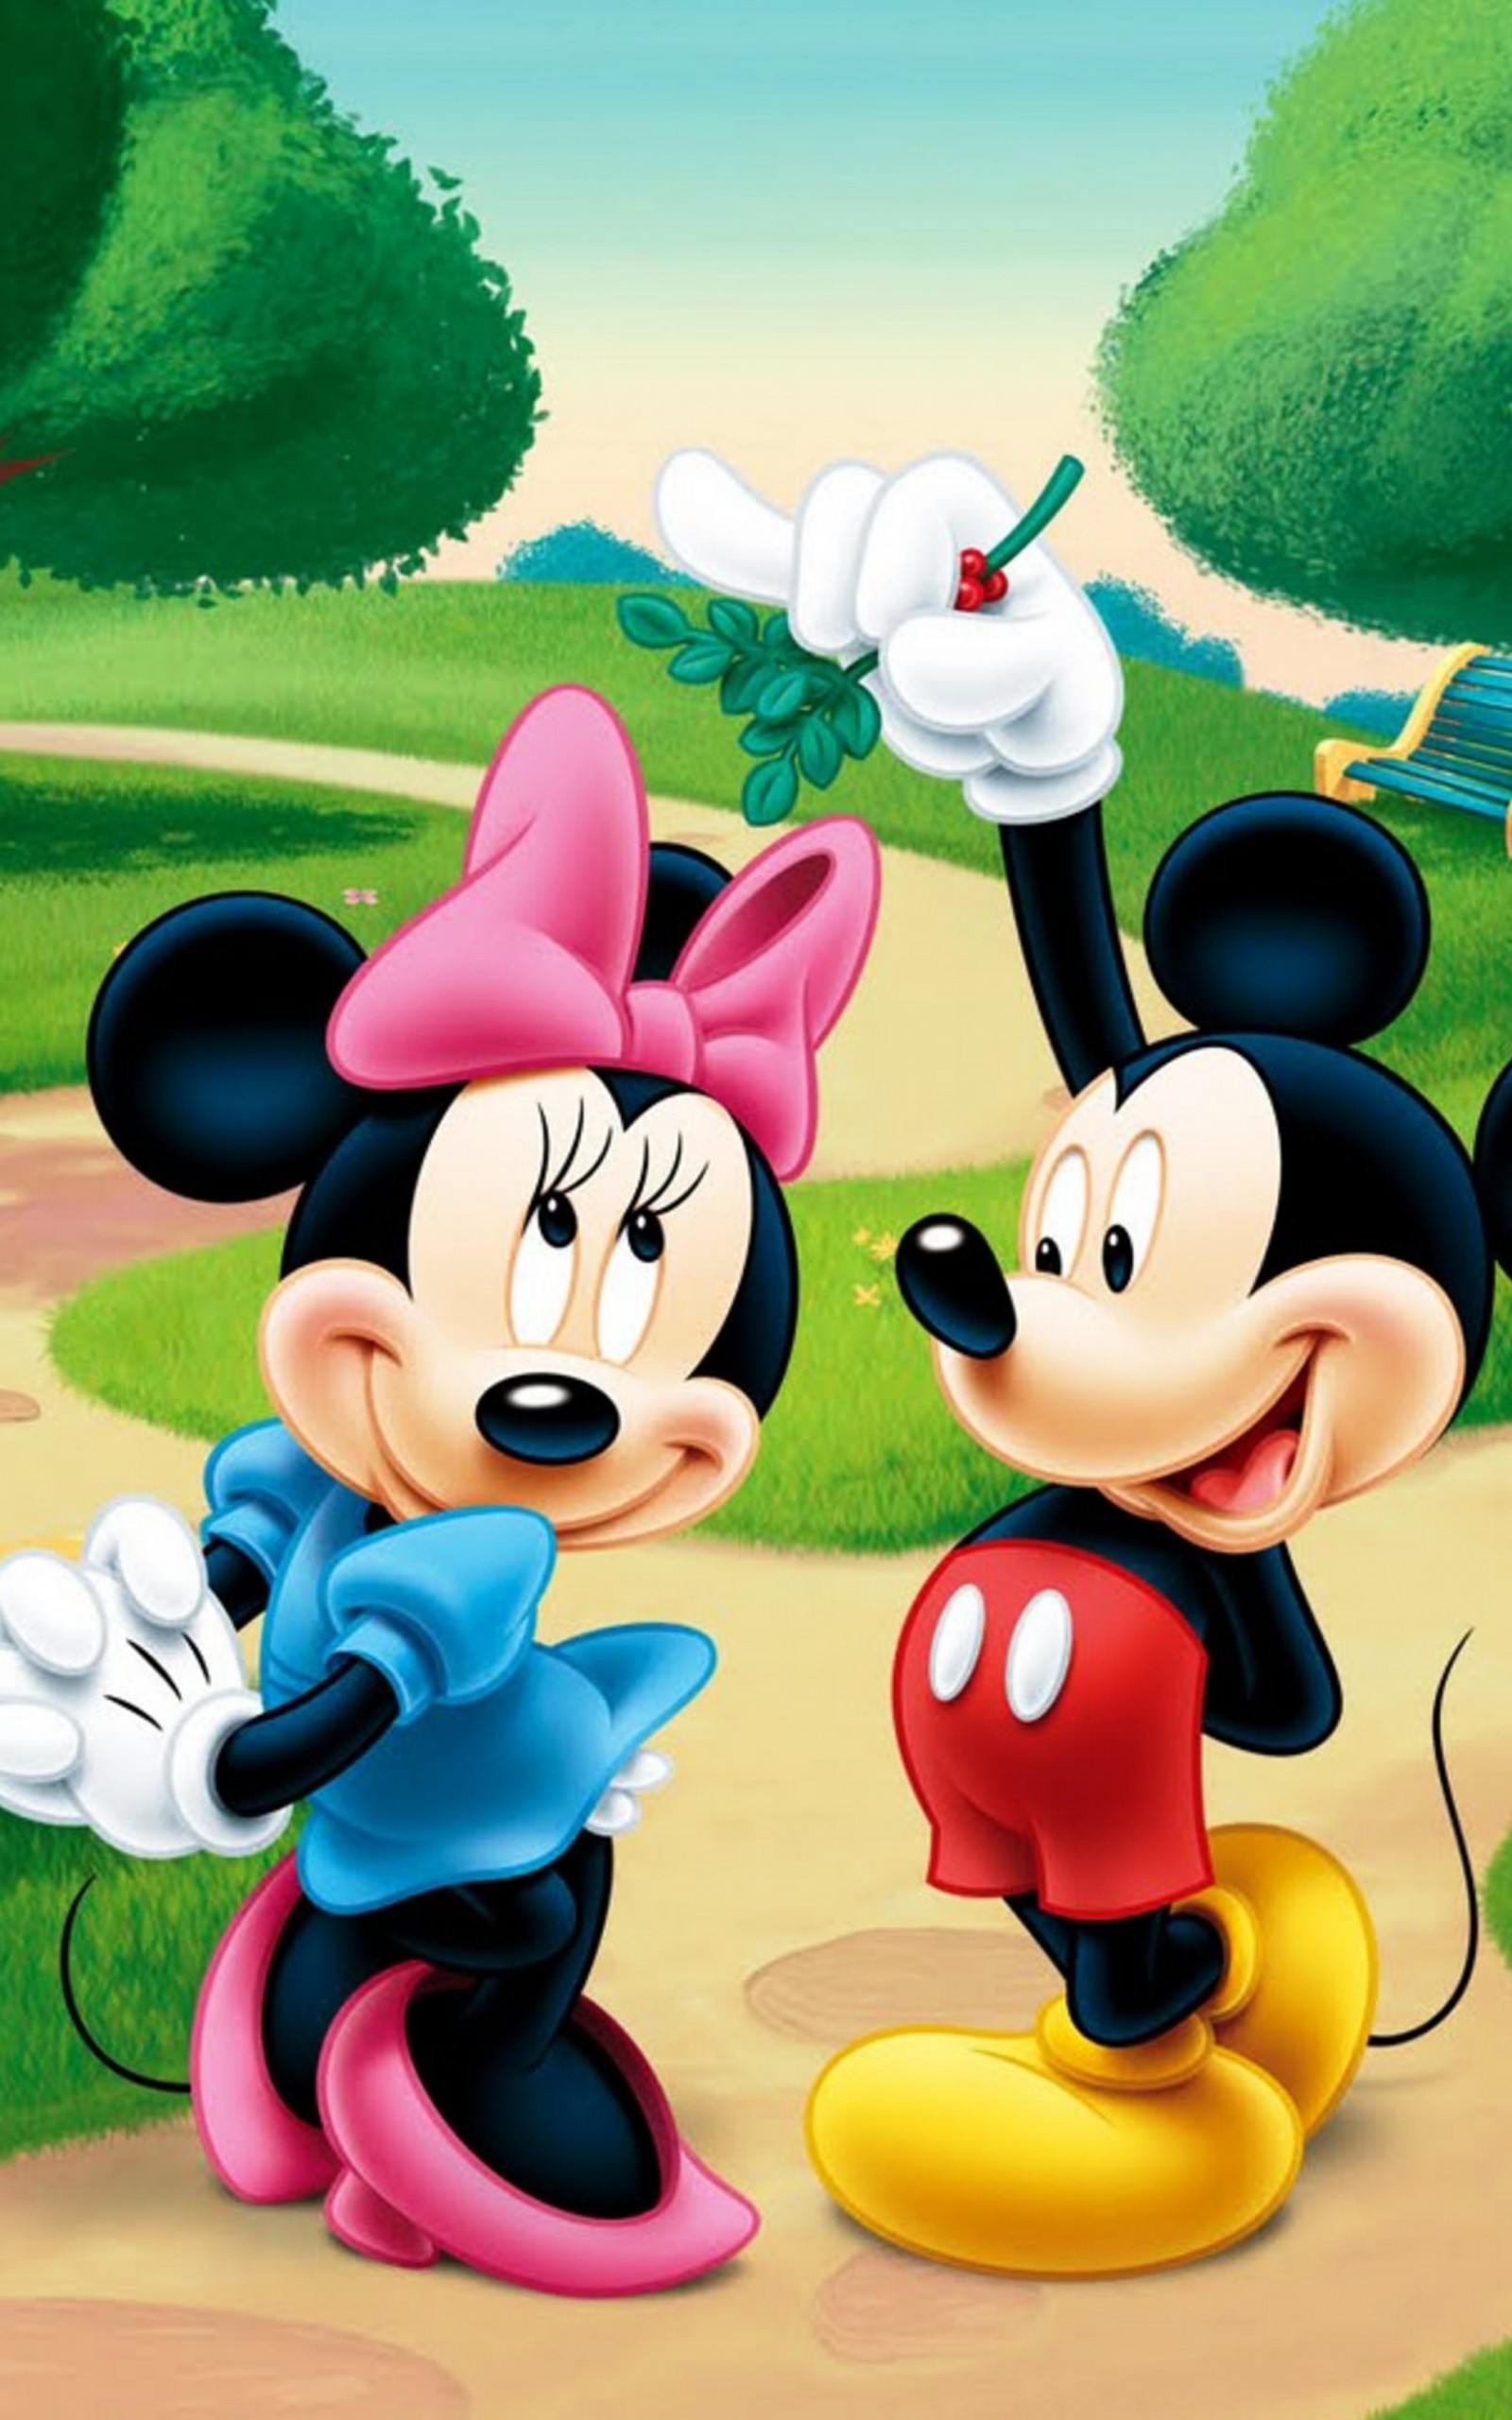 Mickey Mouse Images For Dp - 1600x2560 Wallpaper 